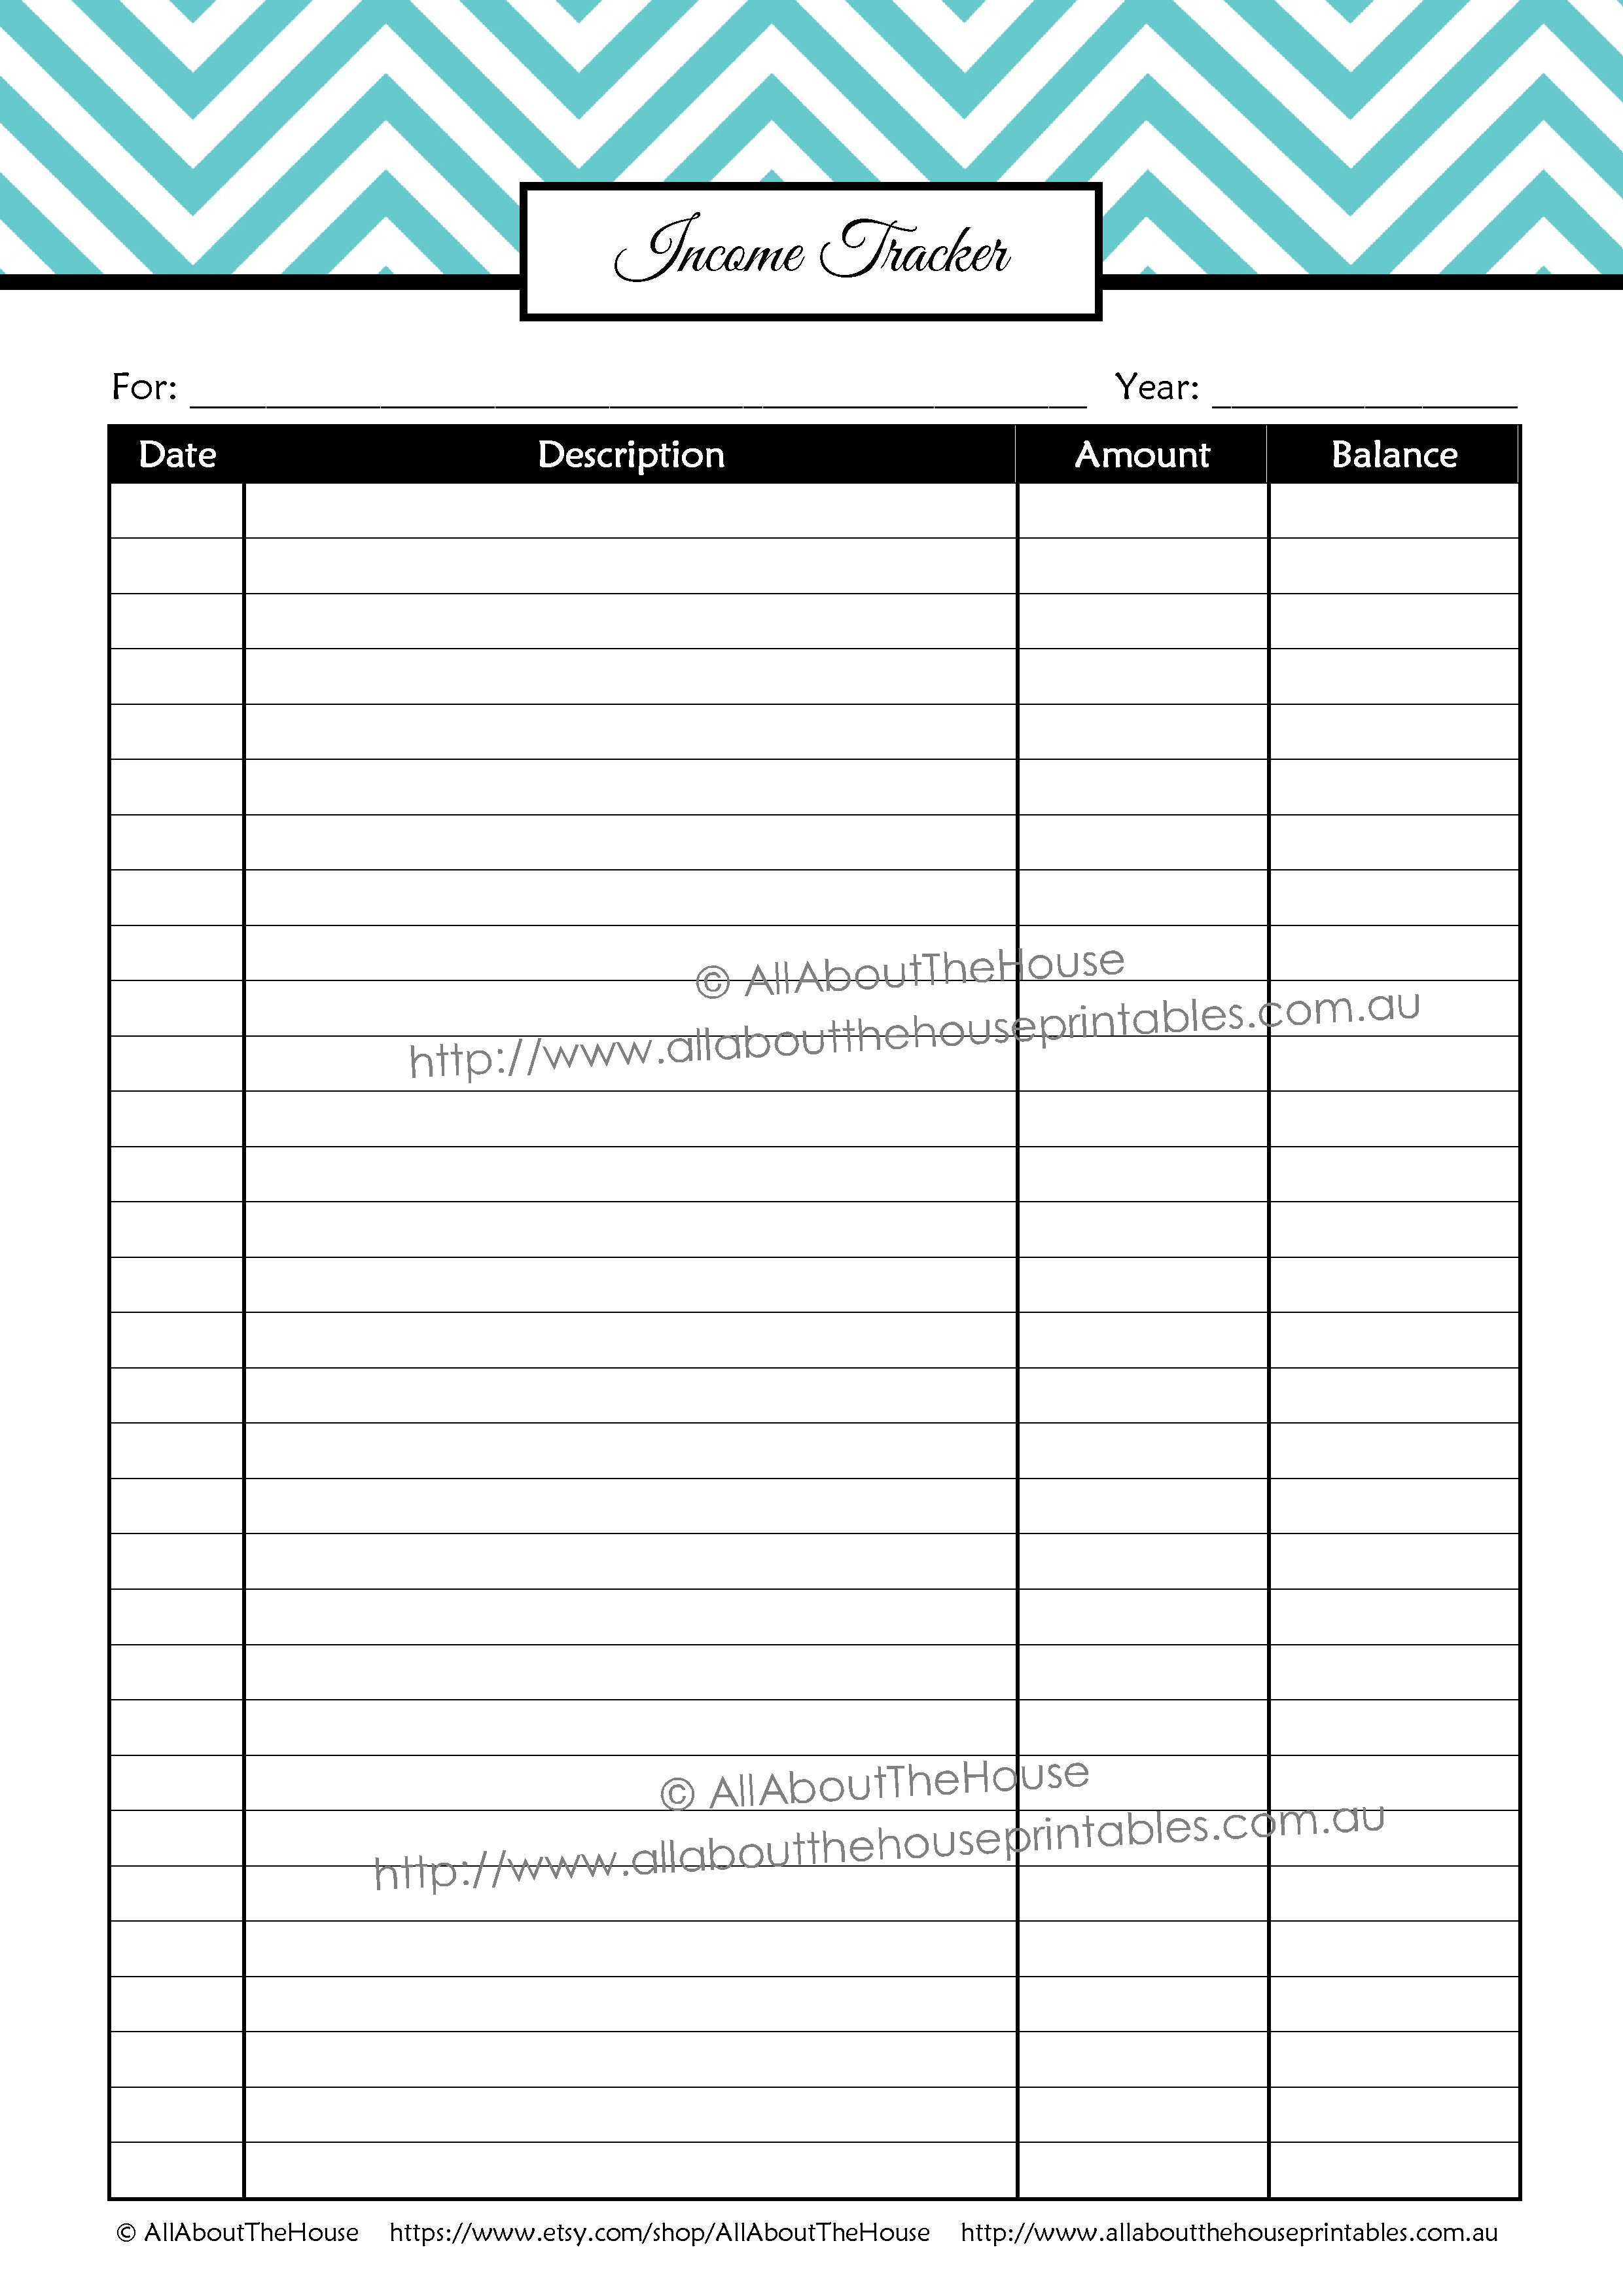 Download Printable Everyday Expense Tracker Pdf